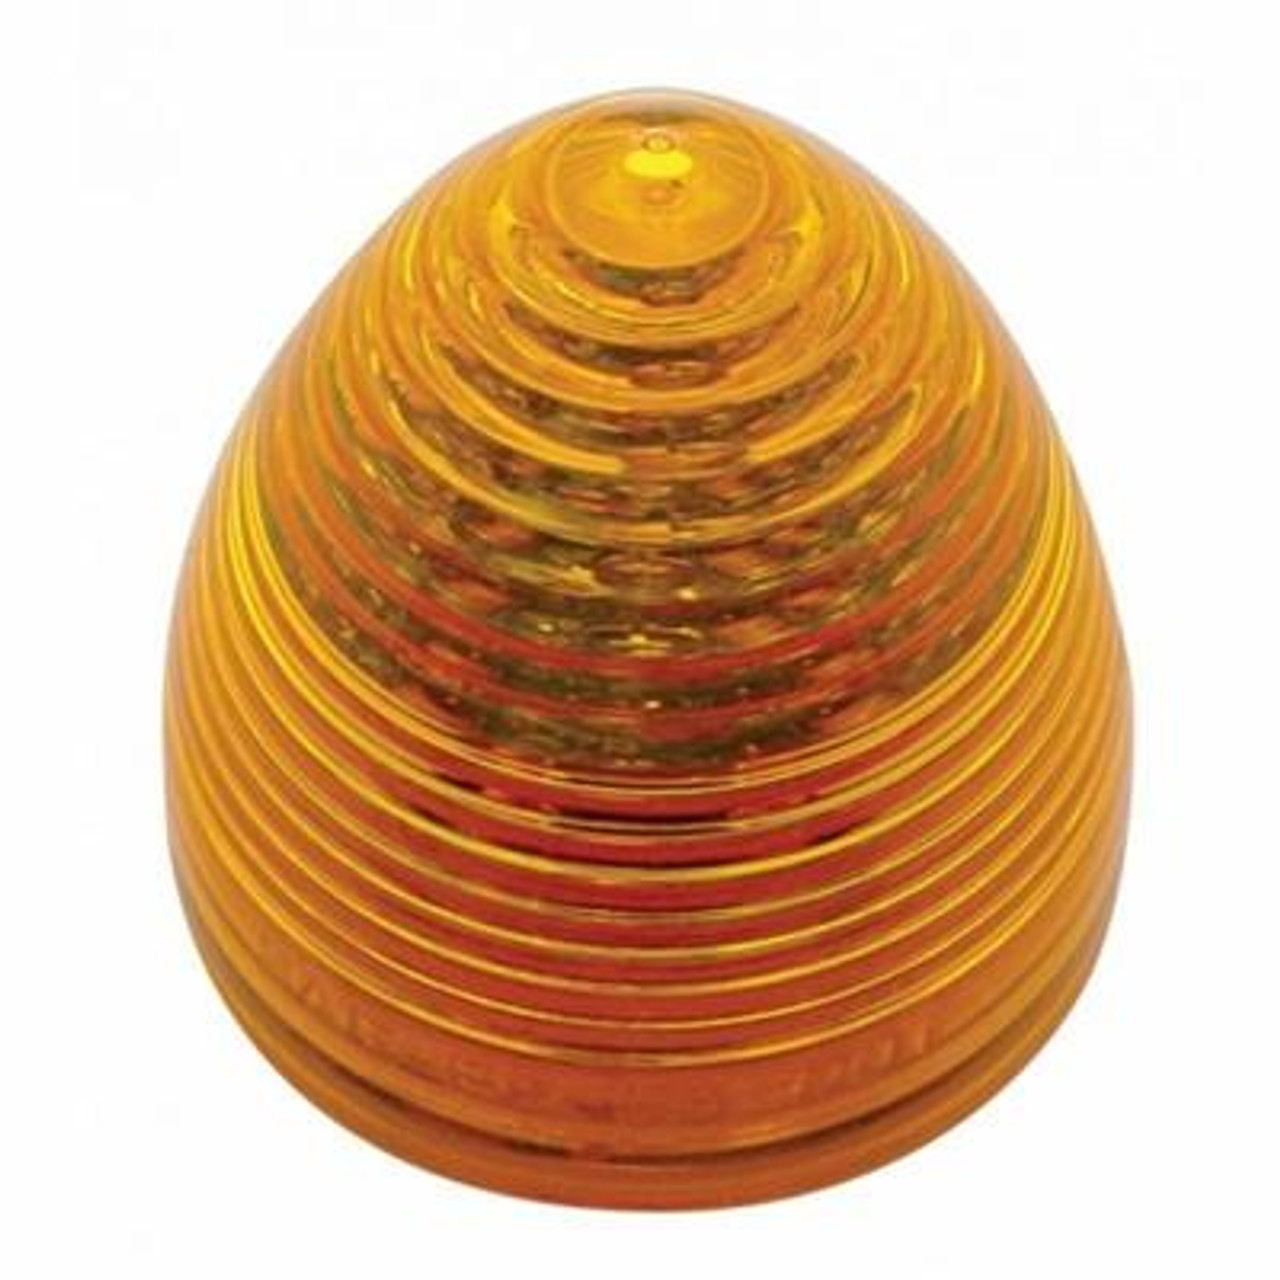 13 LED 2-1/2" Round Beehive Light (Clearance/Marker) - Amber LED/Amber Lens